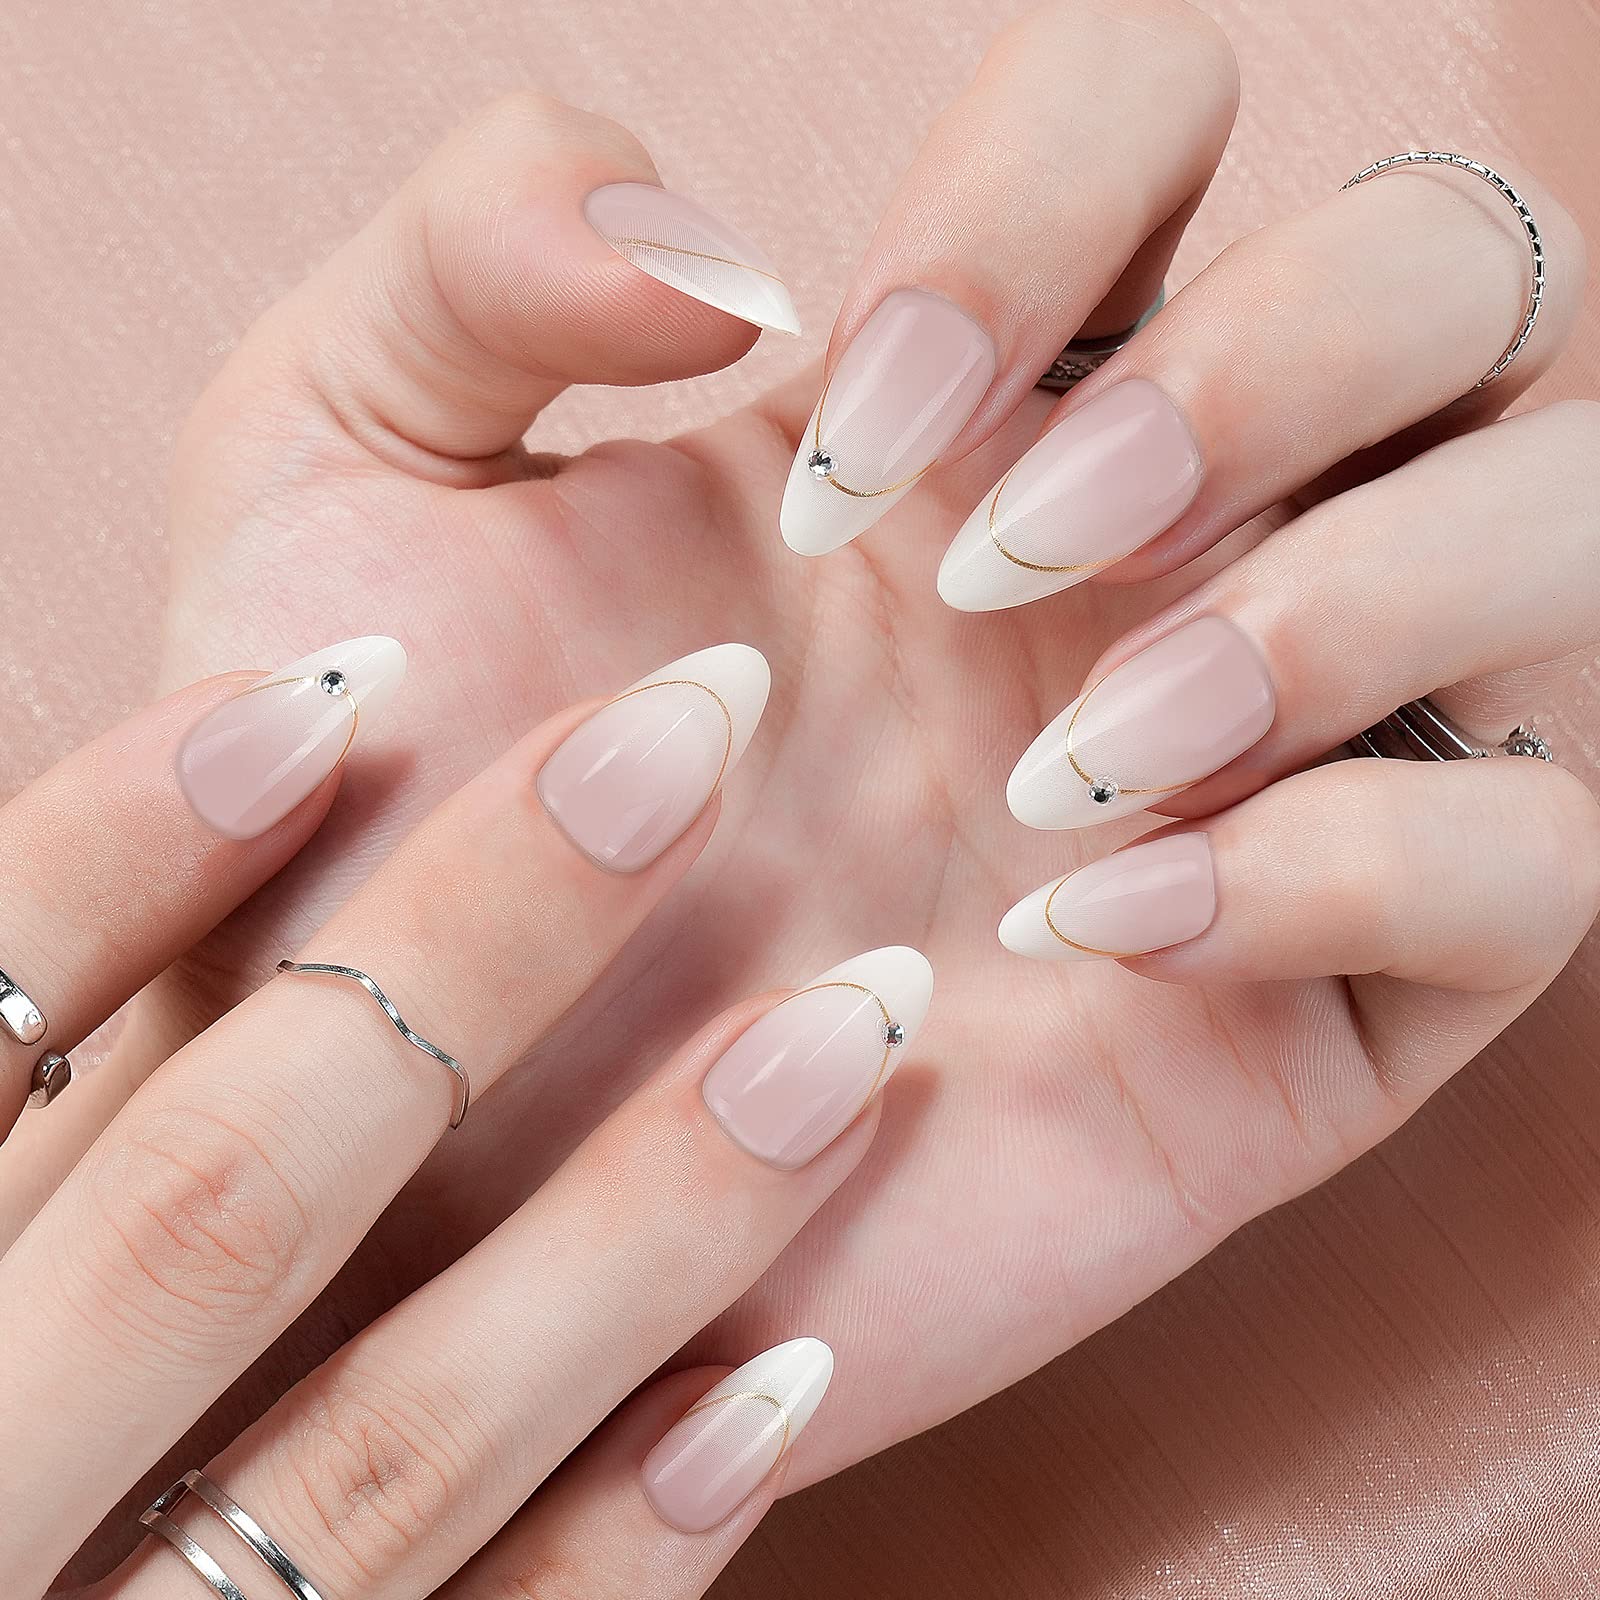 which nail shape would you recommend for me? : r/Nails